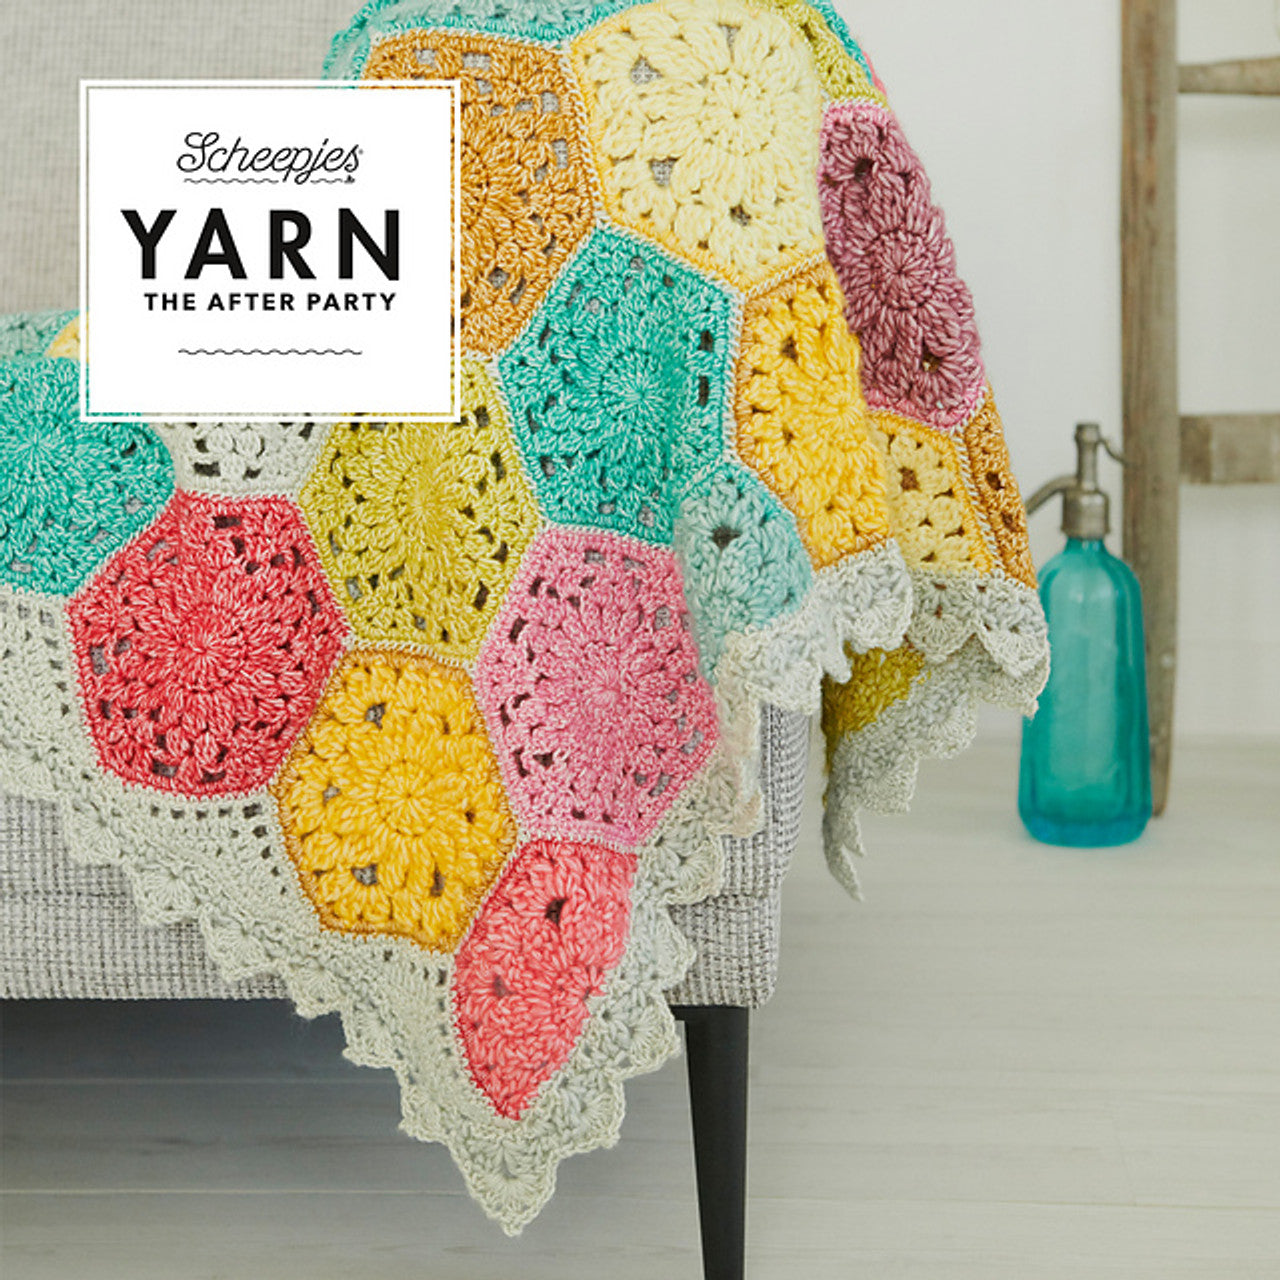 Yarn-The After Party #42 Confetti Blanket (Crochet)